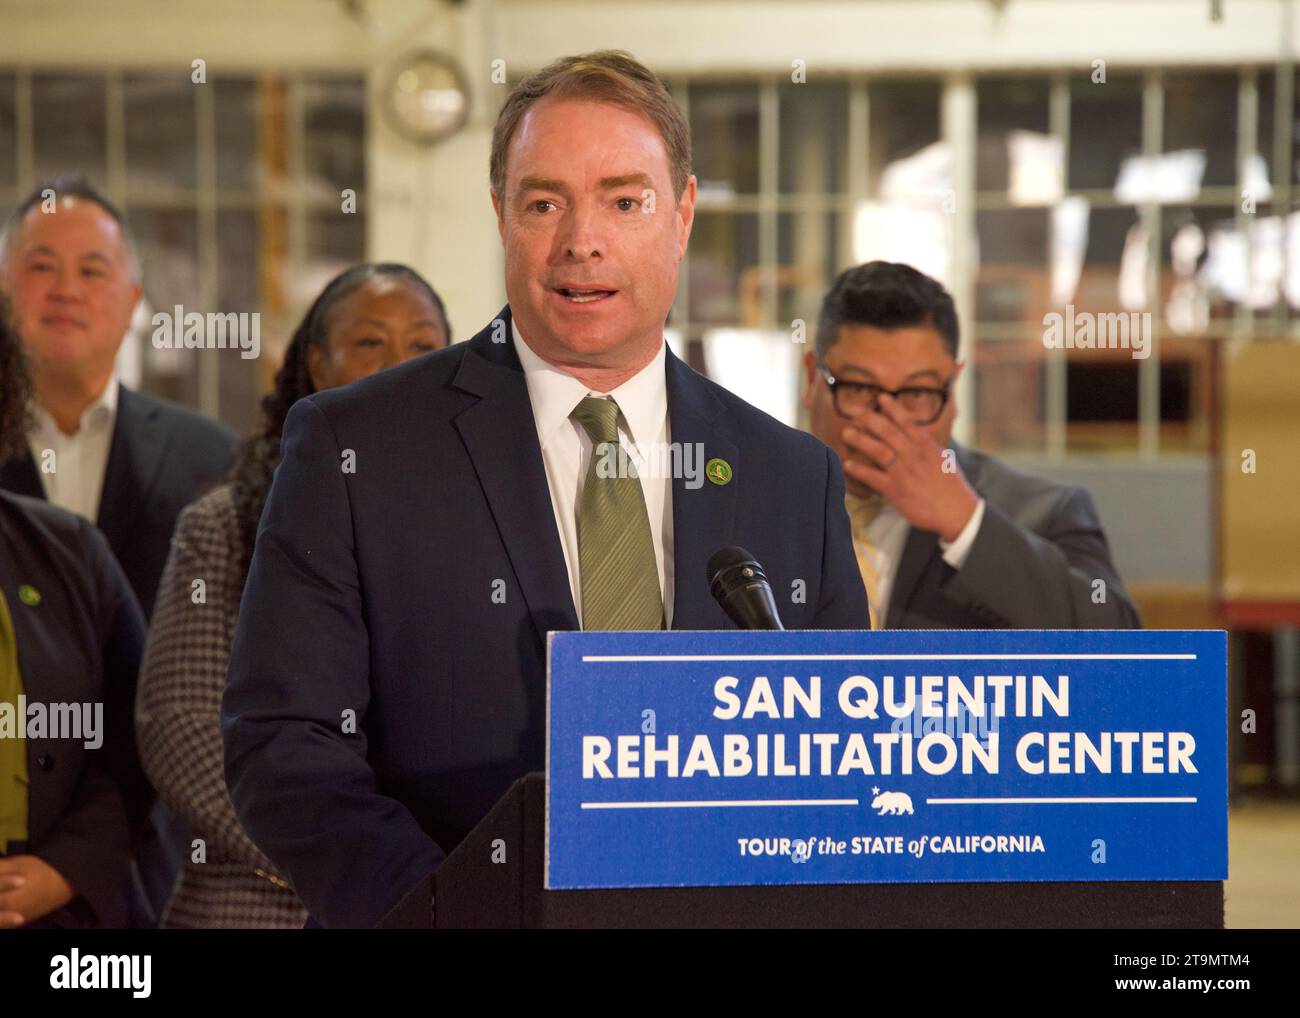 San Quentin, CA - March 17, 2023: Assemblymember Damon Connolly, speaking at a press conf at San Quentin State Prison with Governor Newsom. Stock Photo